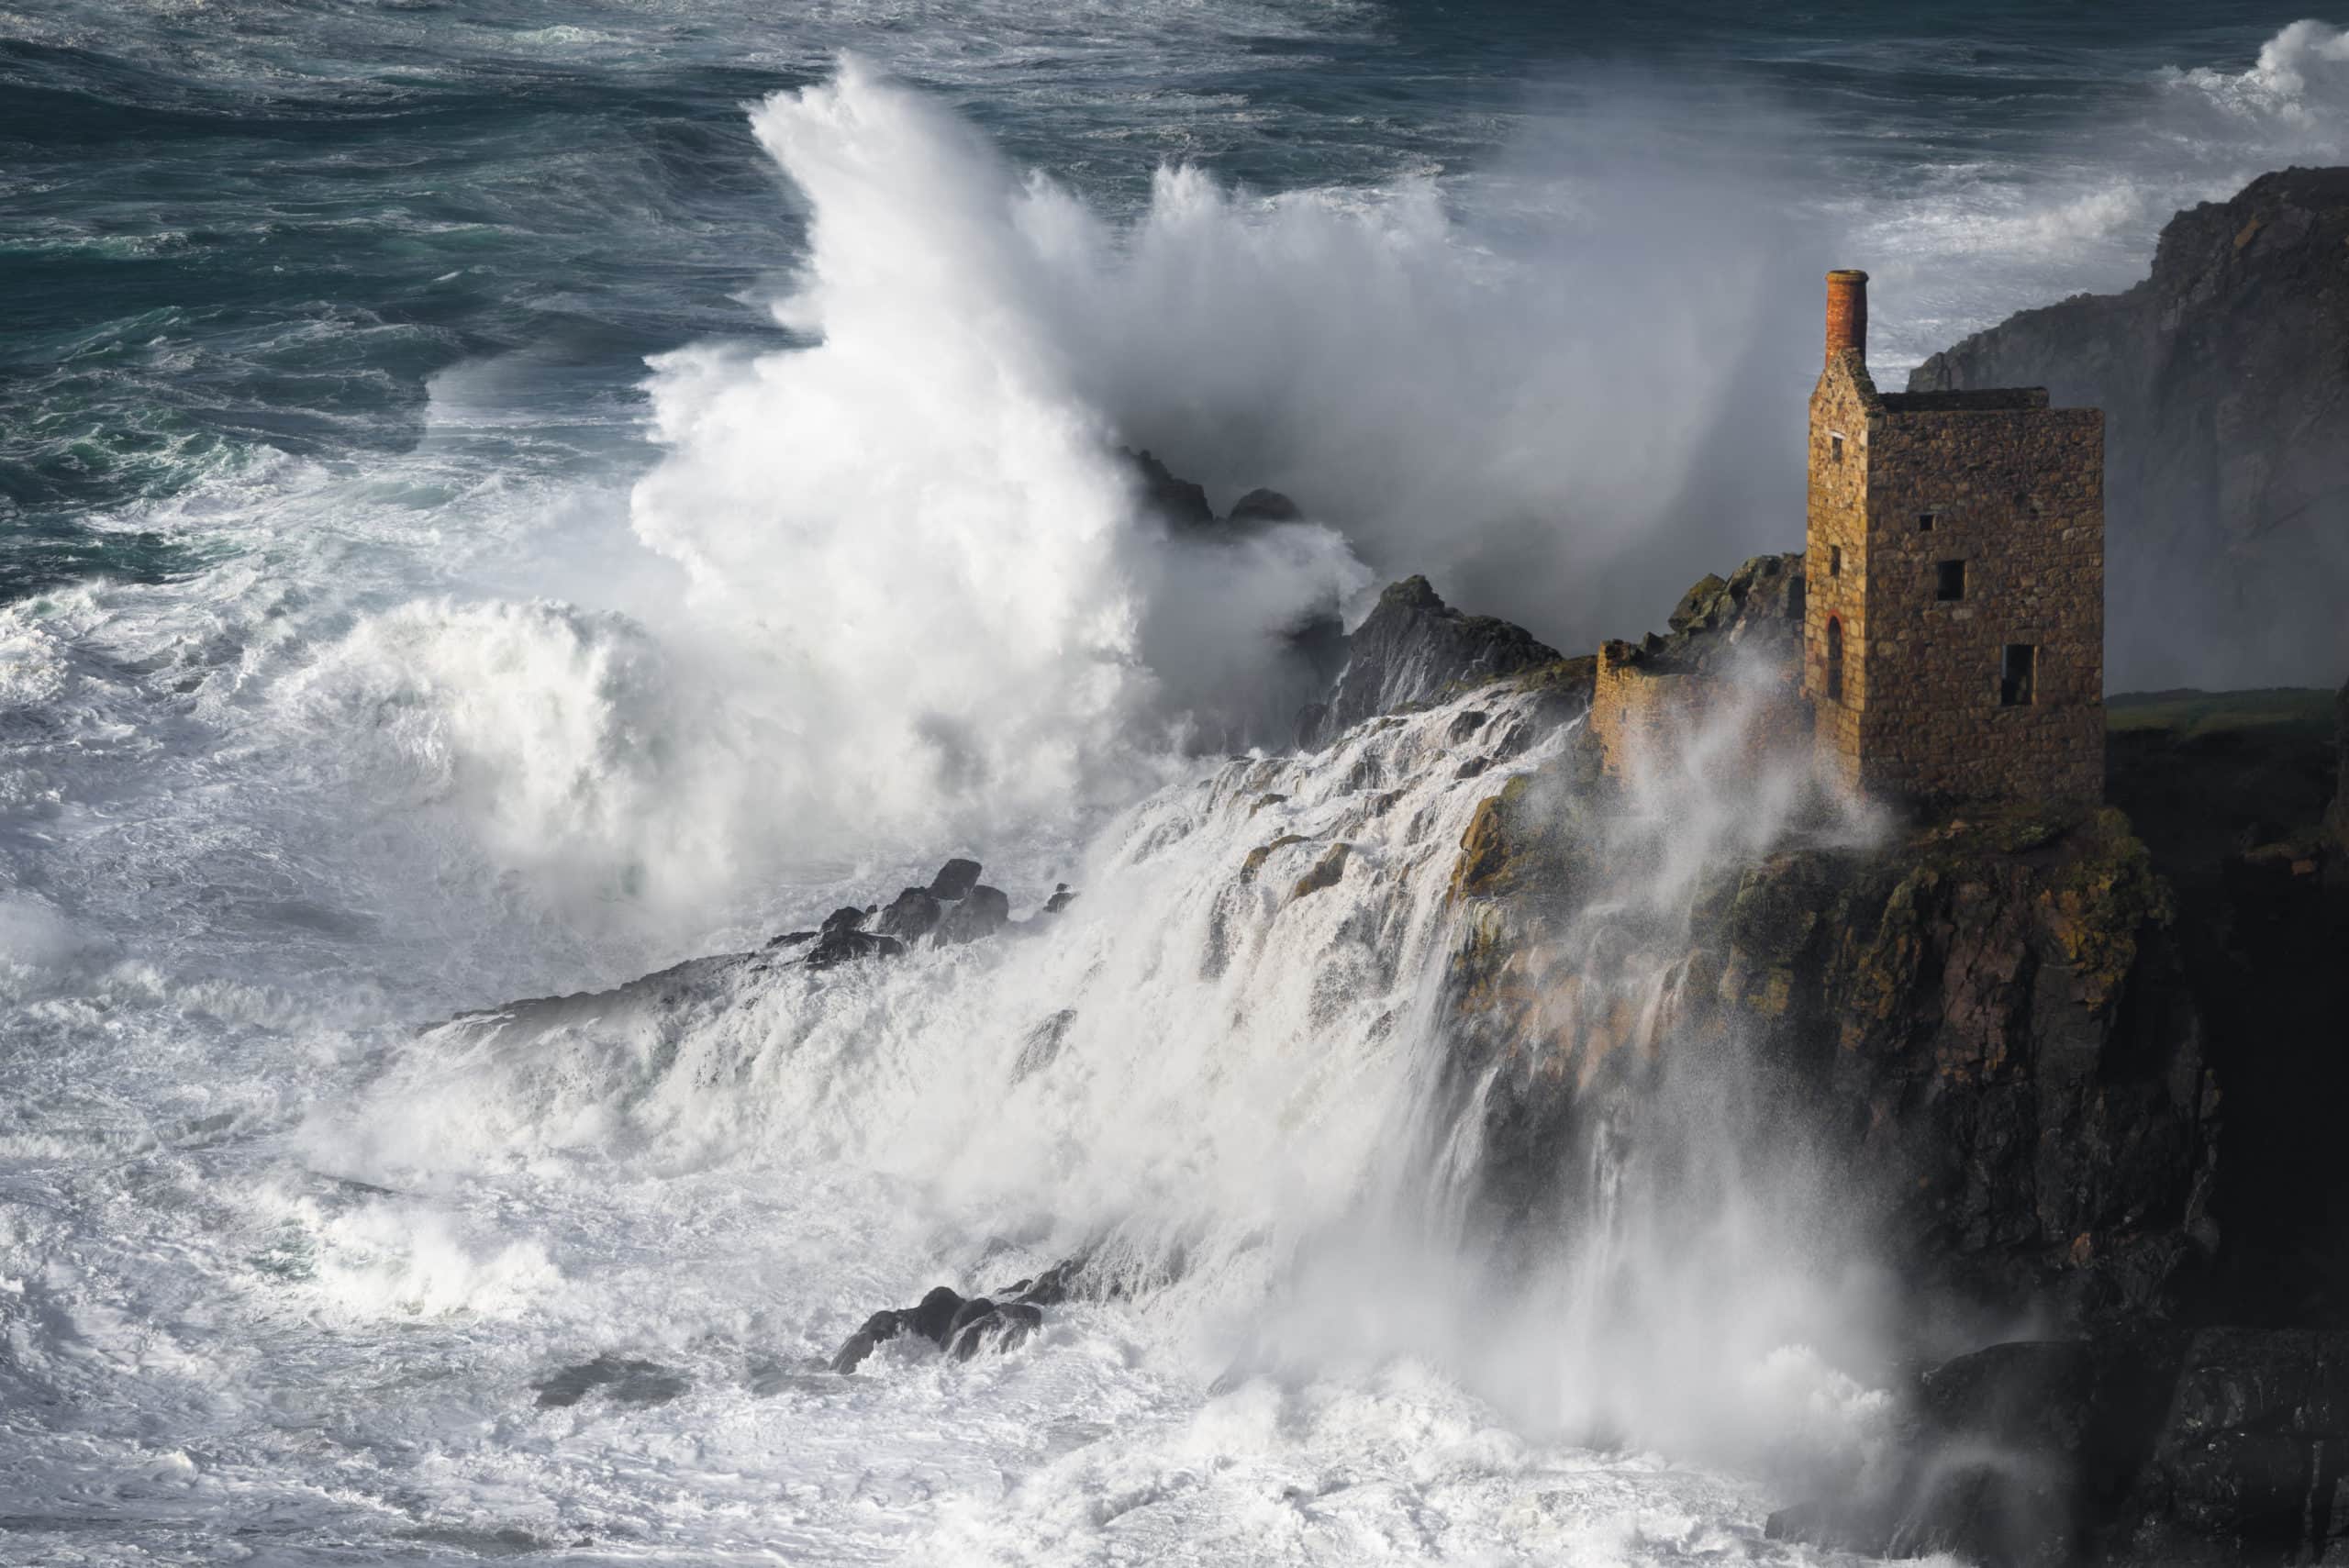 Stormy Seas at Crowns engine house, Botallack mine, Cornwall